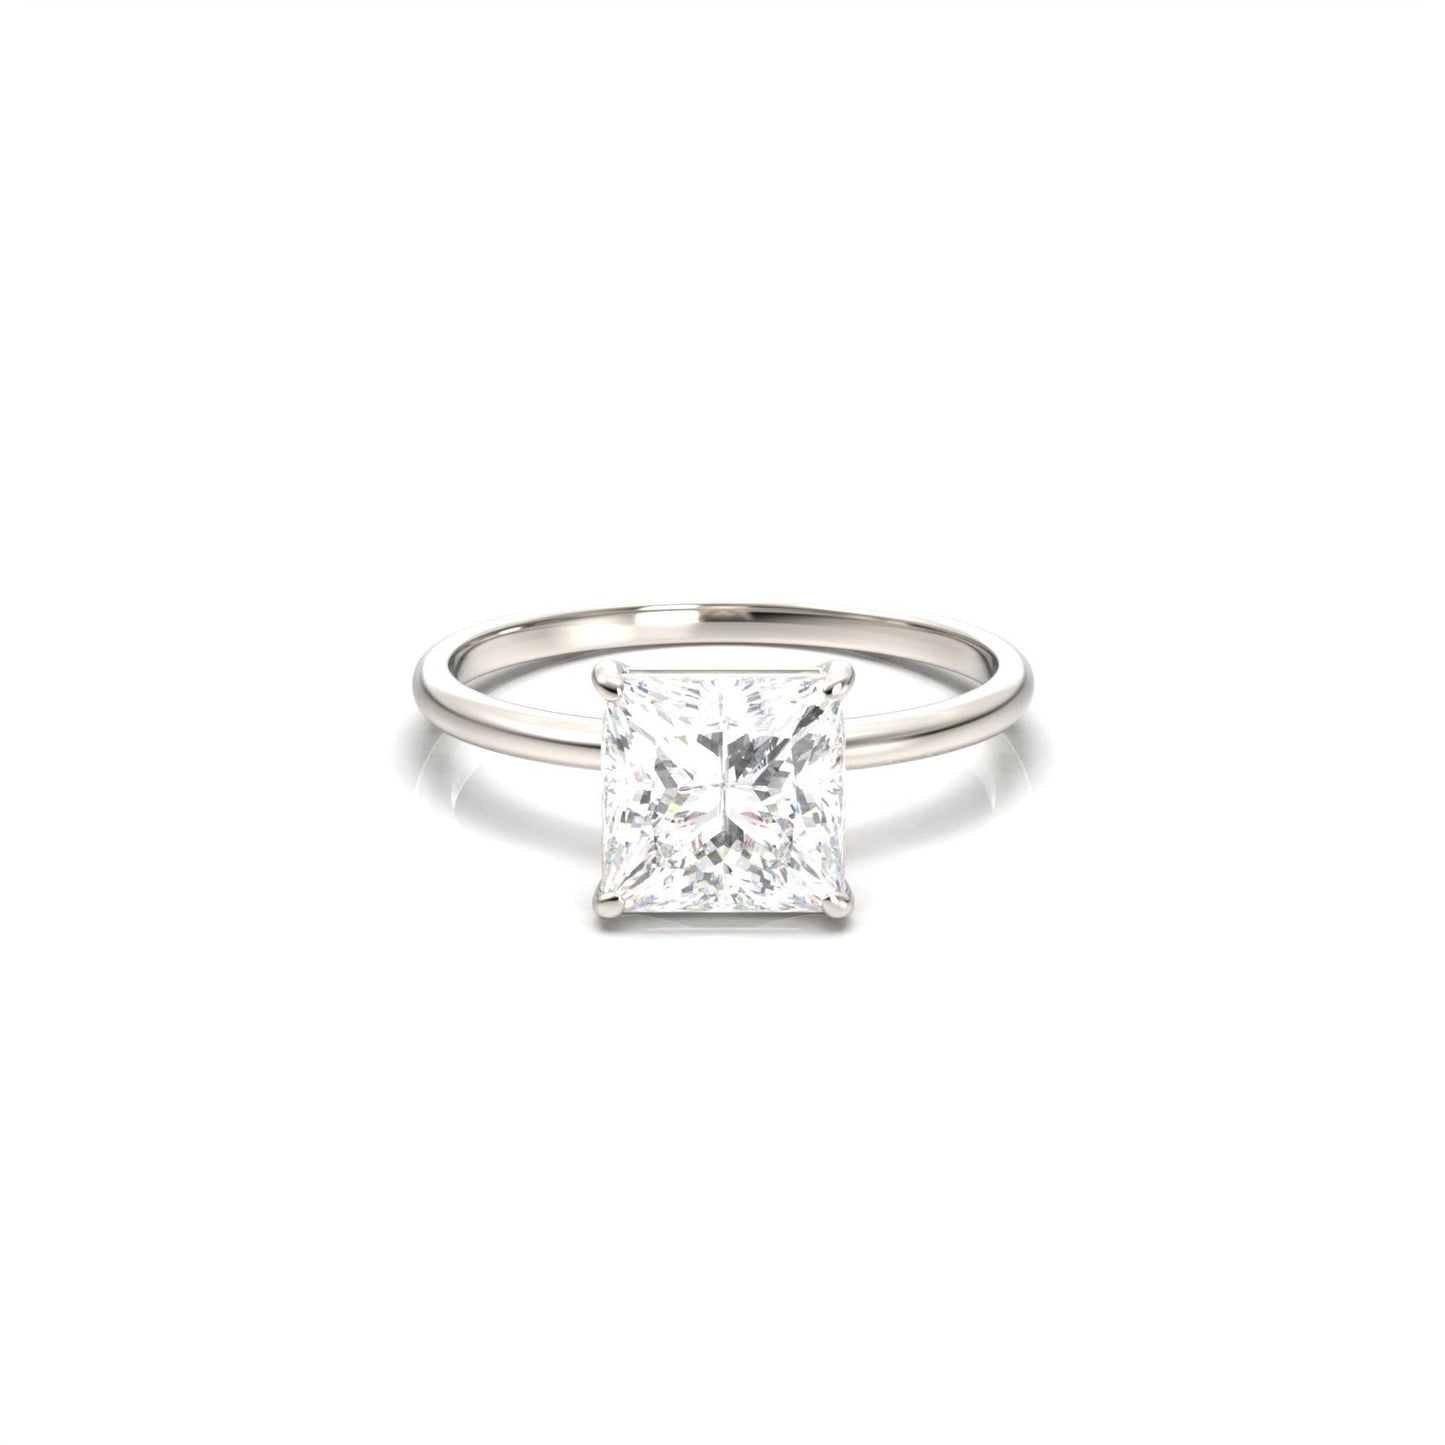 Princess Cut Solitaire 4 Claw Moissanite Engagement Ring - moissaniteengagementrings